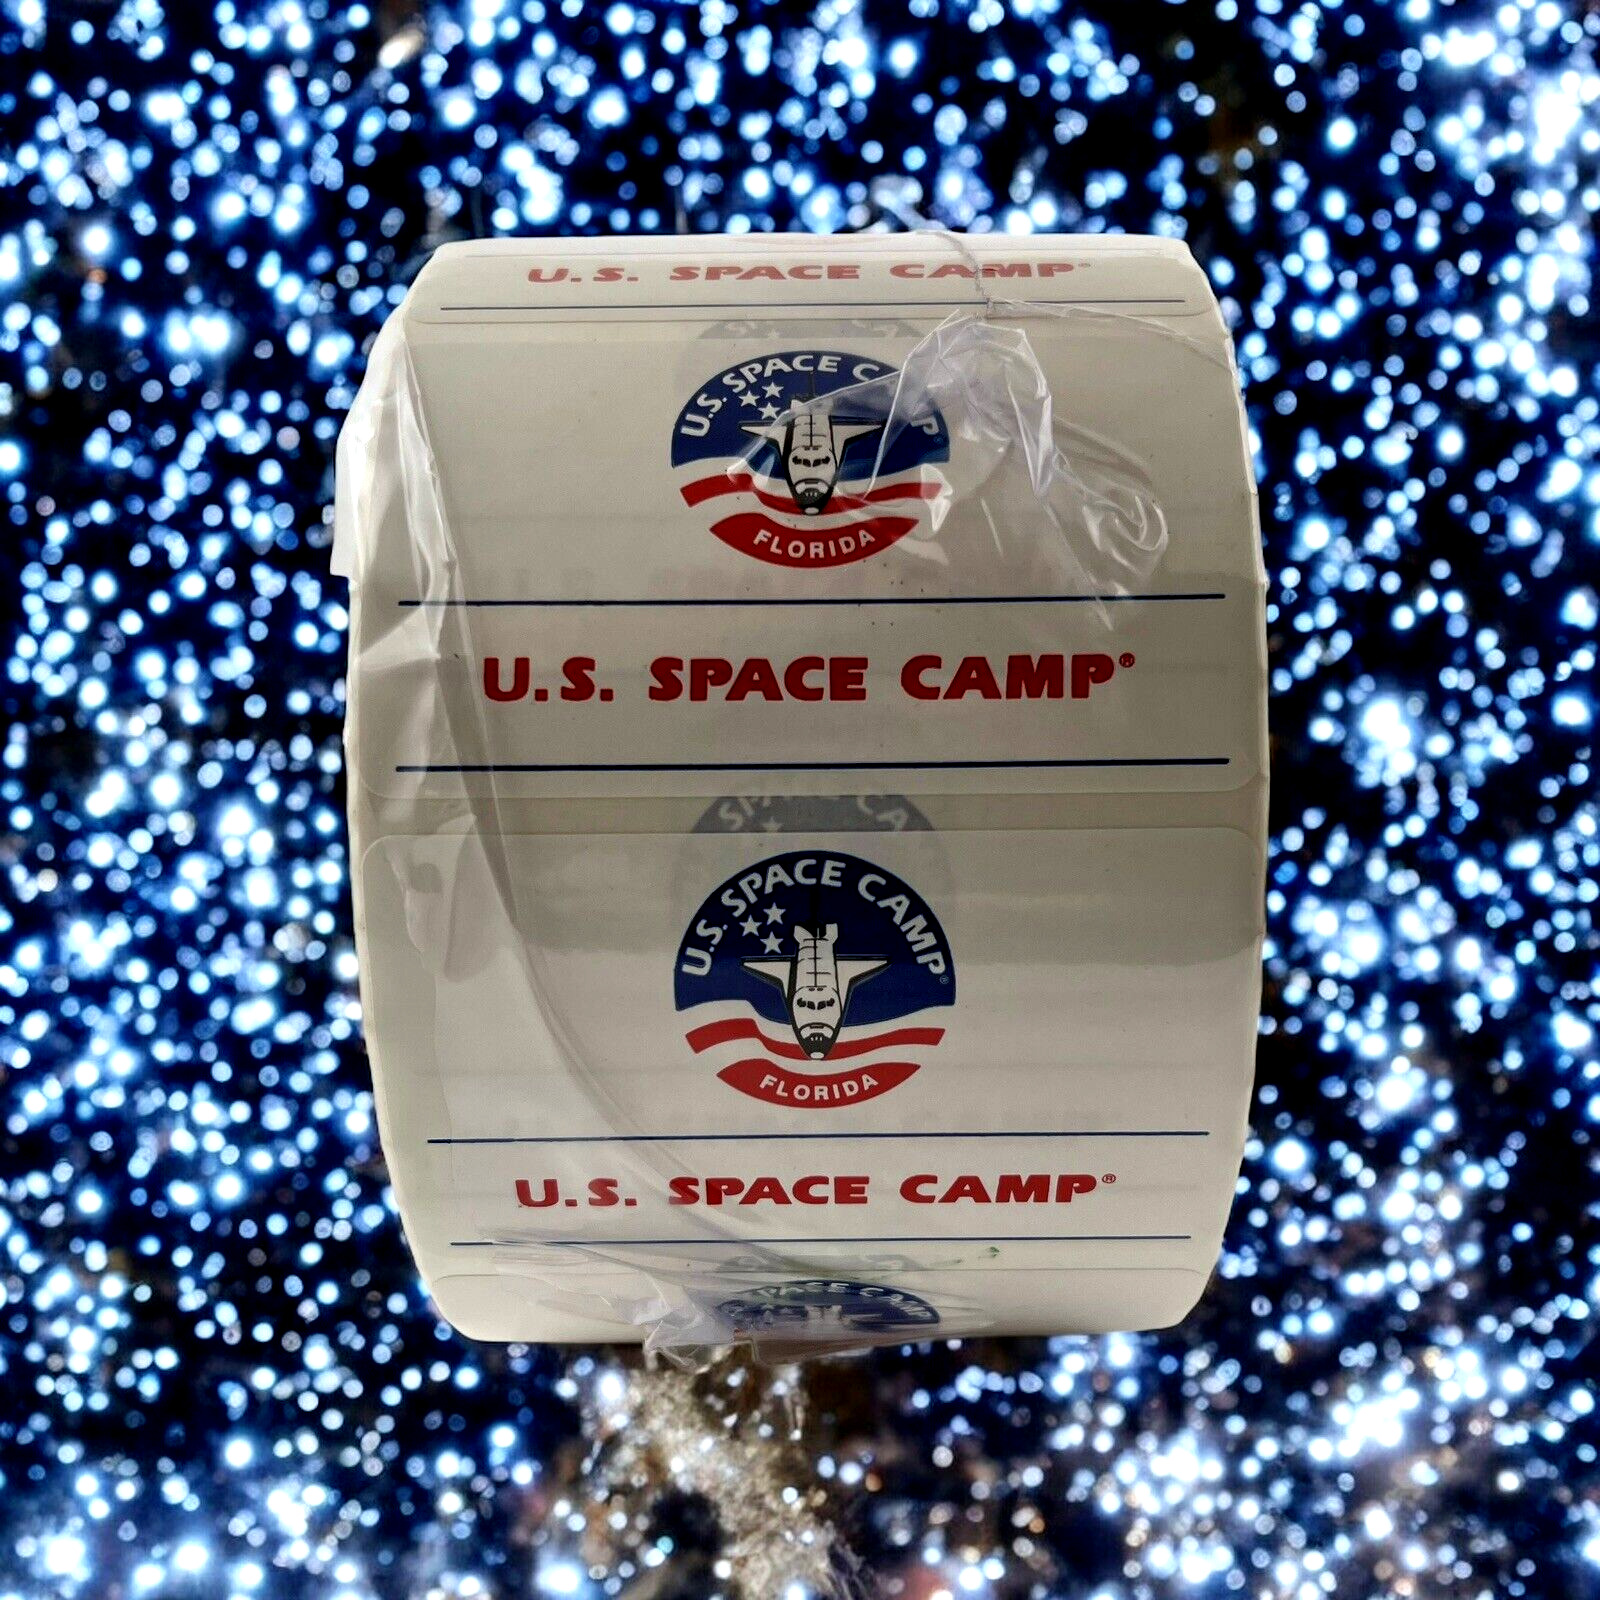 U.S. FLORIDA NASA SPACE ASTRONAUT CAMP Vintage NEW ROLL of STICKERS Labels LOGO